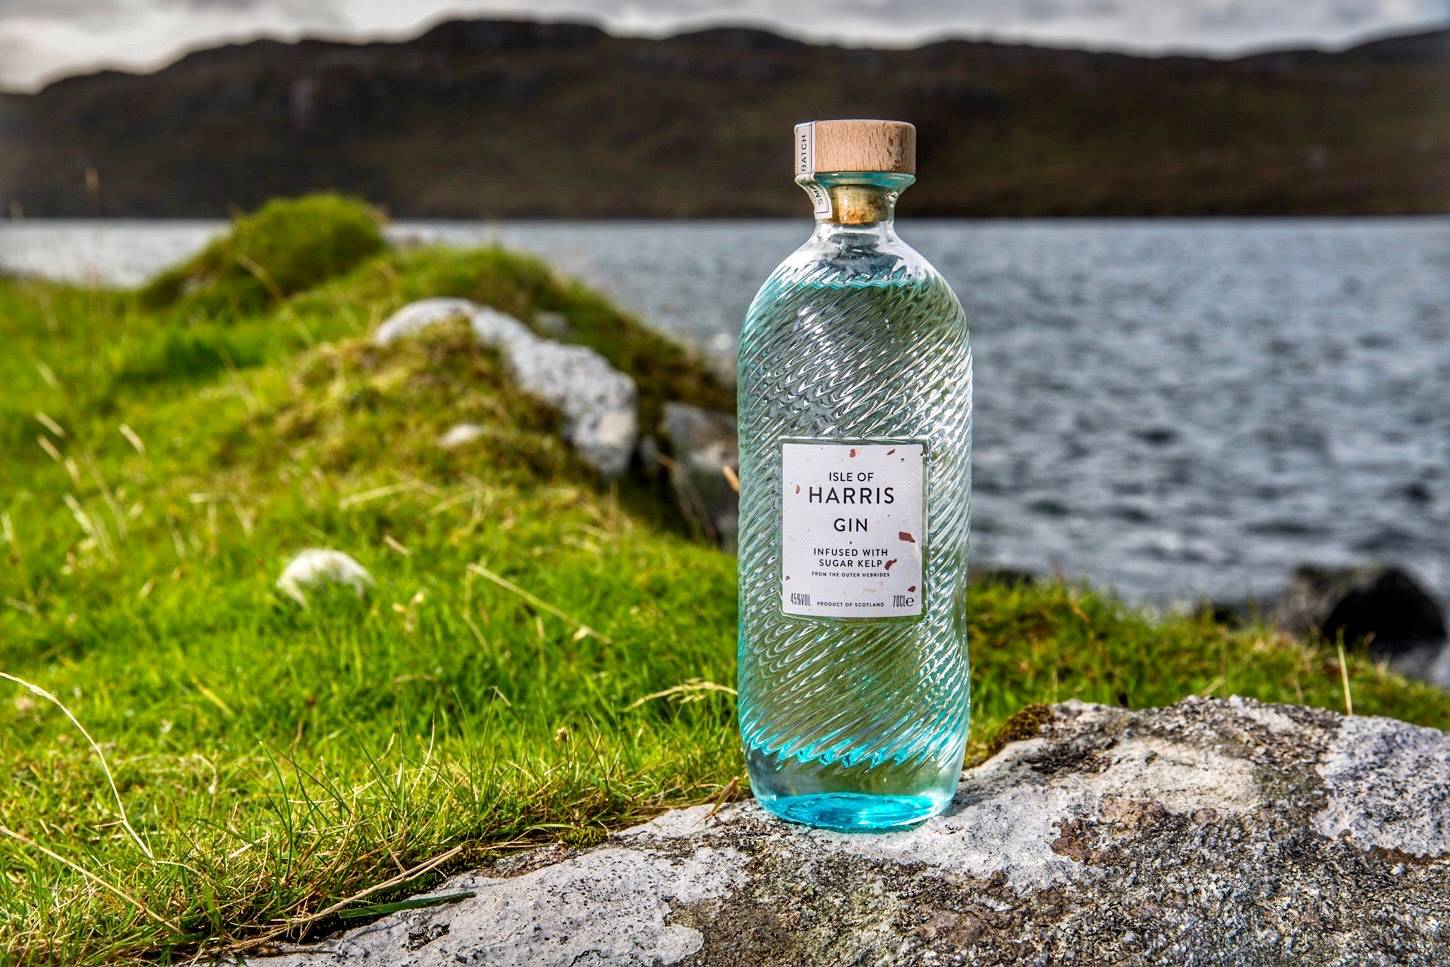 A bottle of Harris gin on the grass